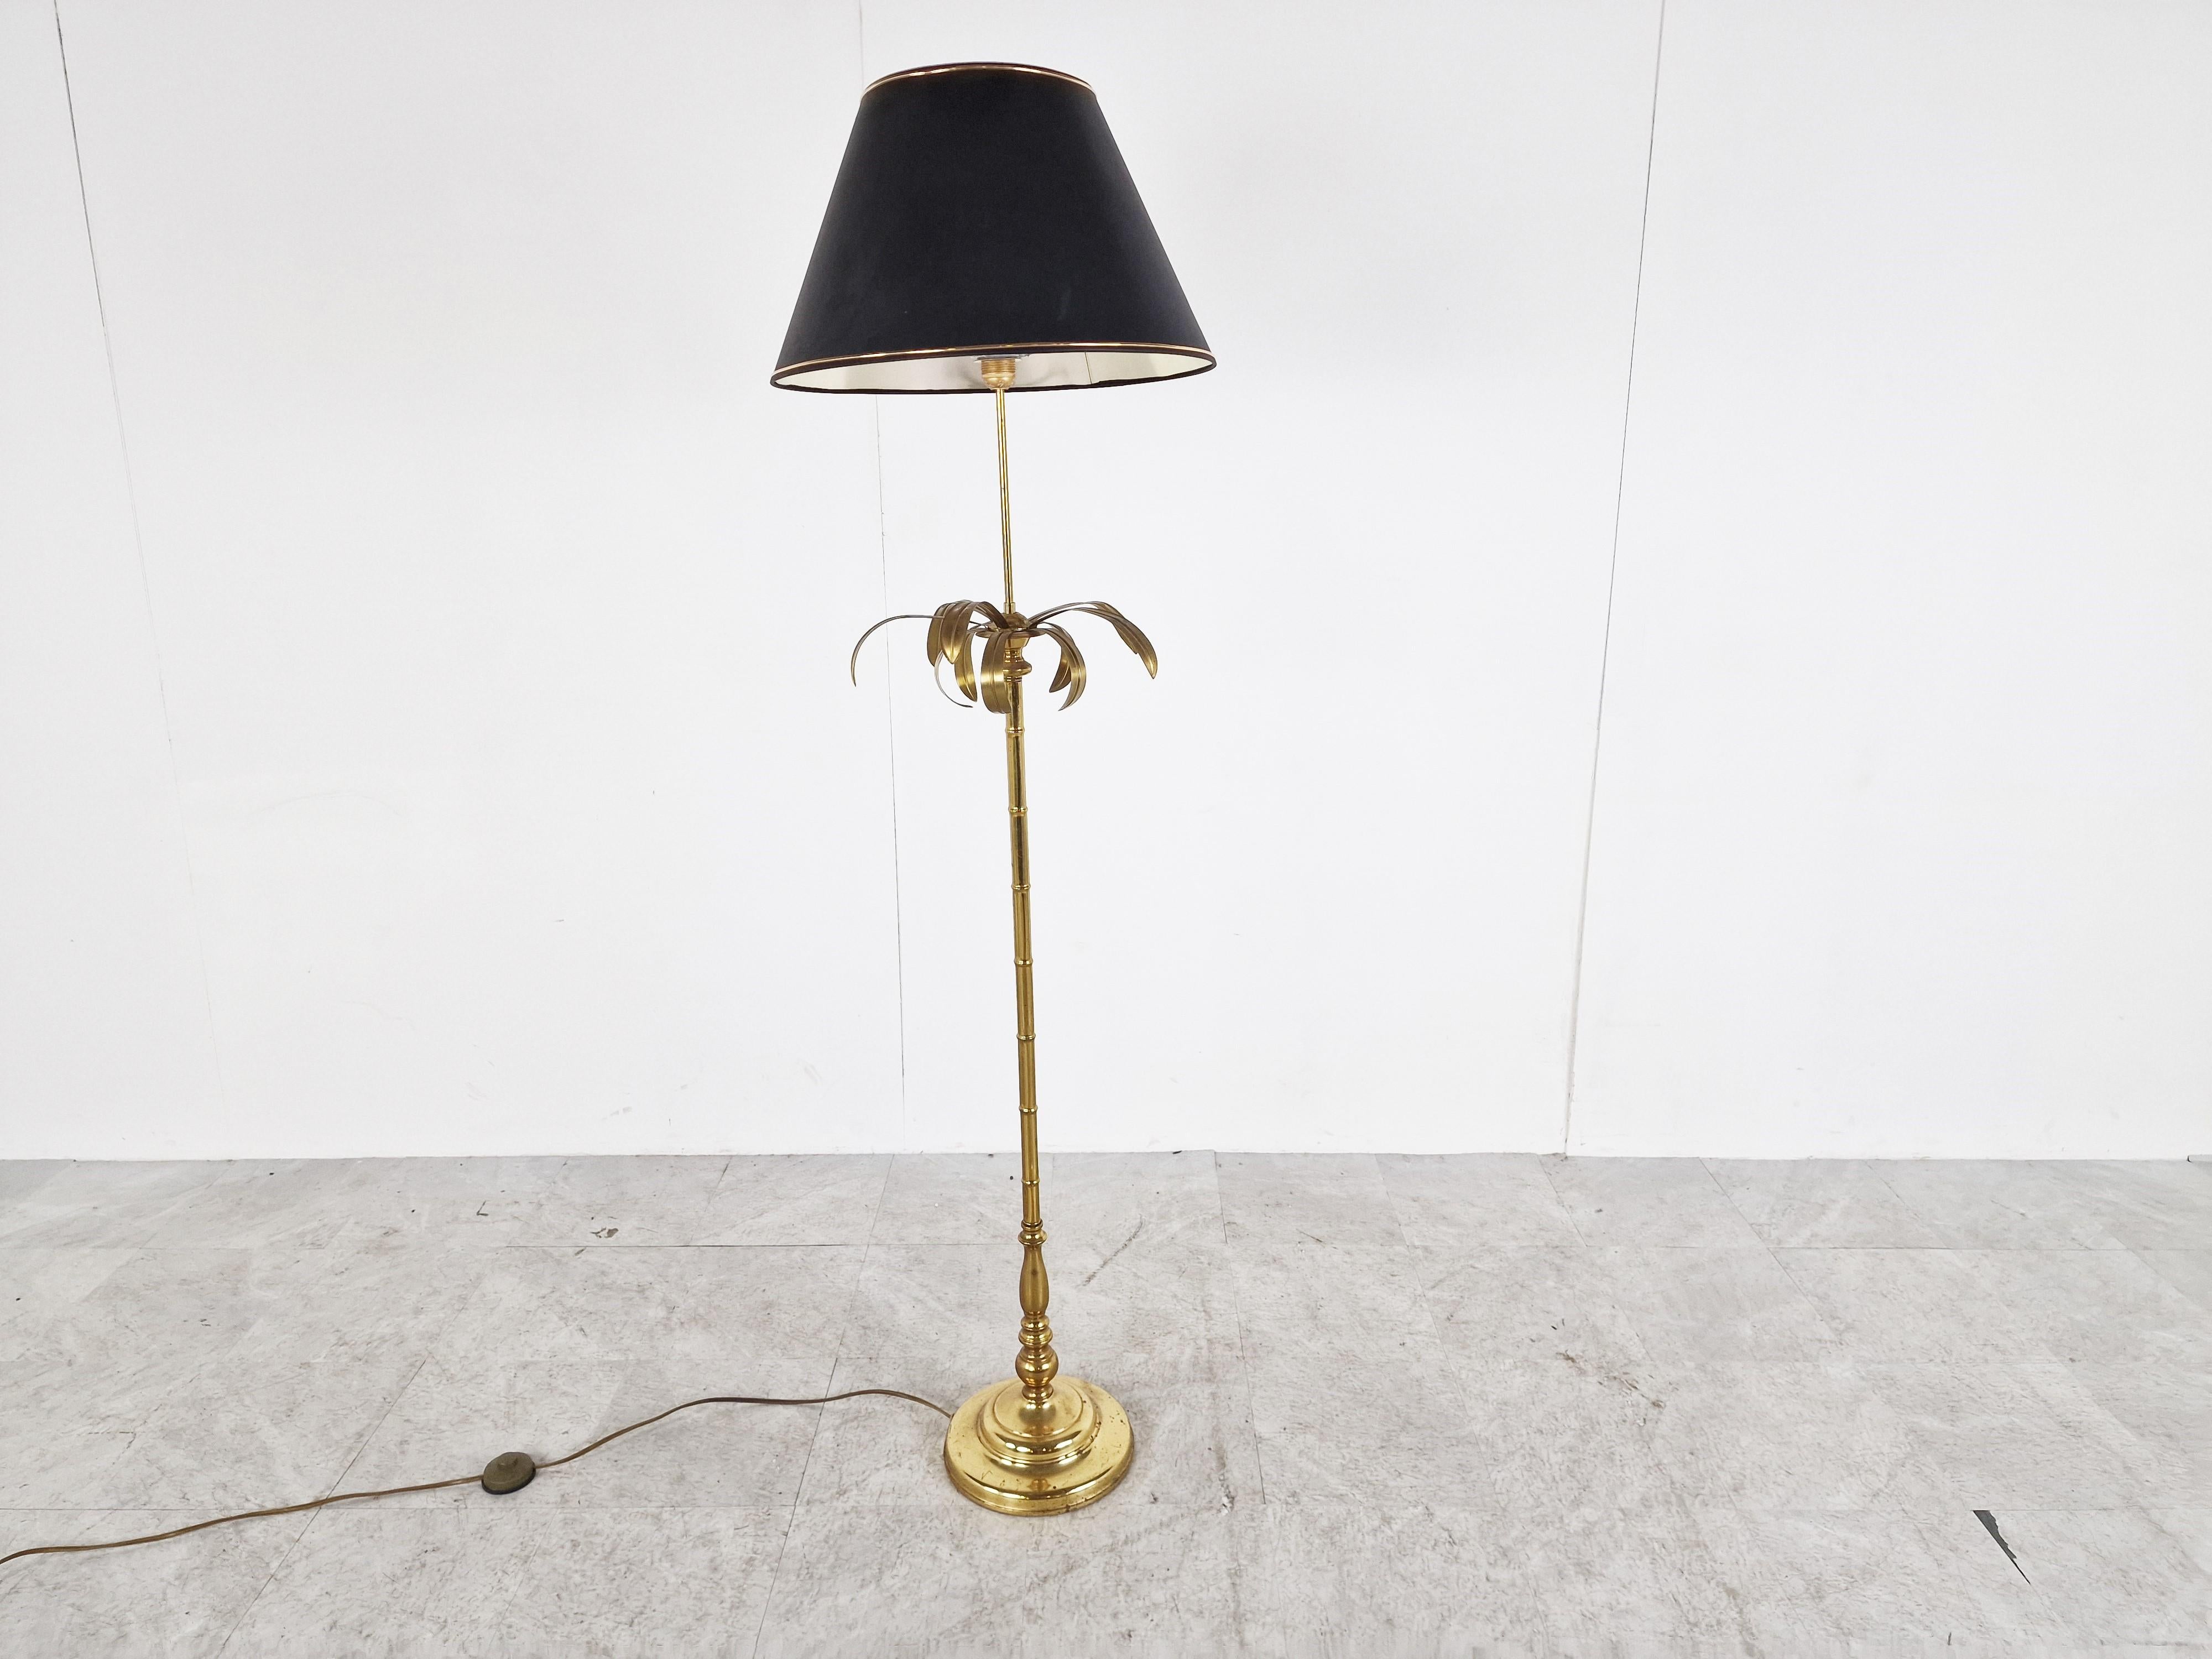 Vintage brass faux bamboo and pineapple leaf floor lamp with a black and gold shade.

Beautiful striking lfoor lamp which emits a soft light.

good condition with the right patina.

Tested and ready to use with a regular E26/E27 light